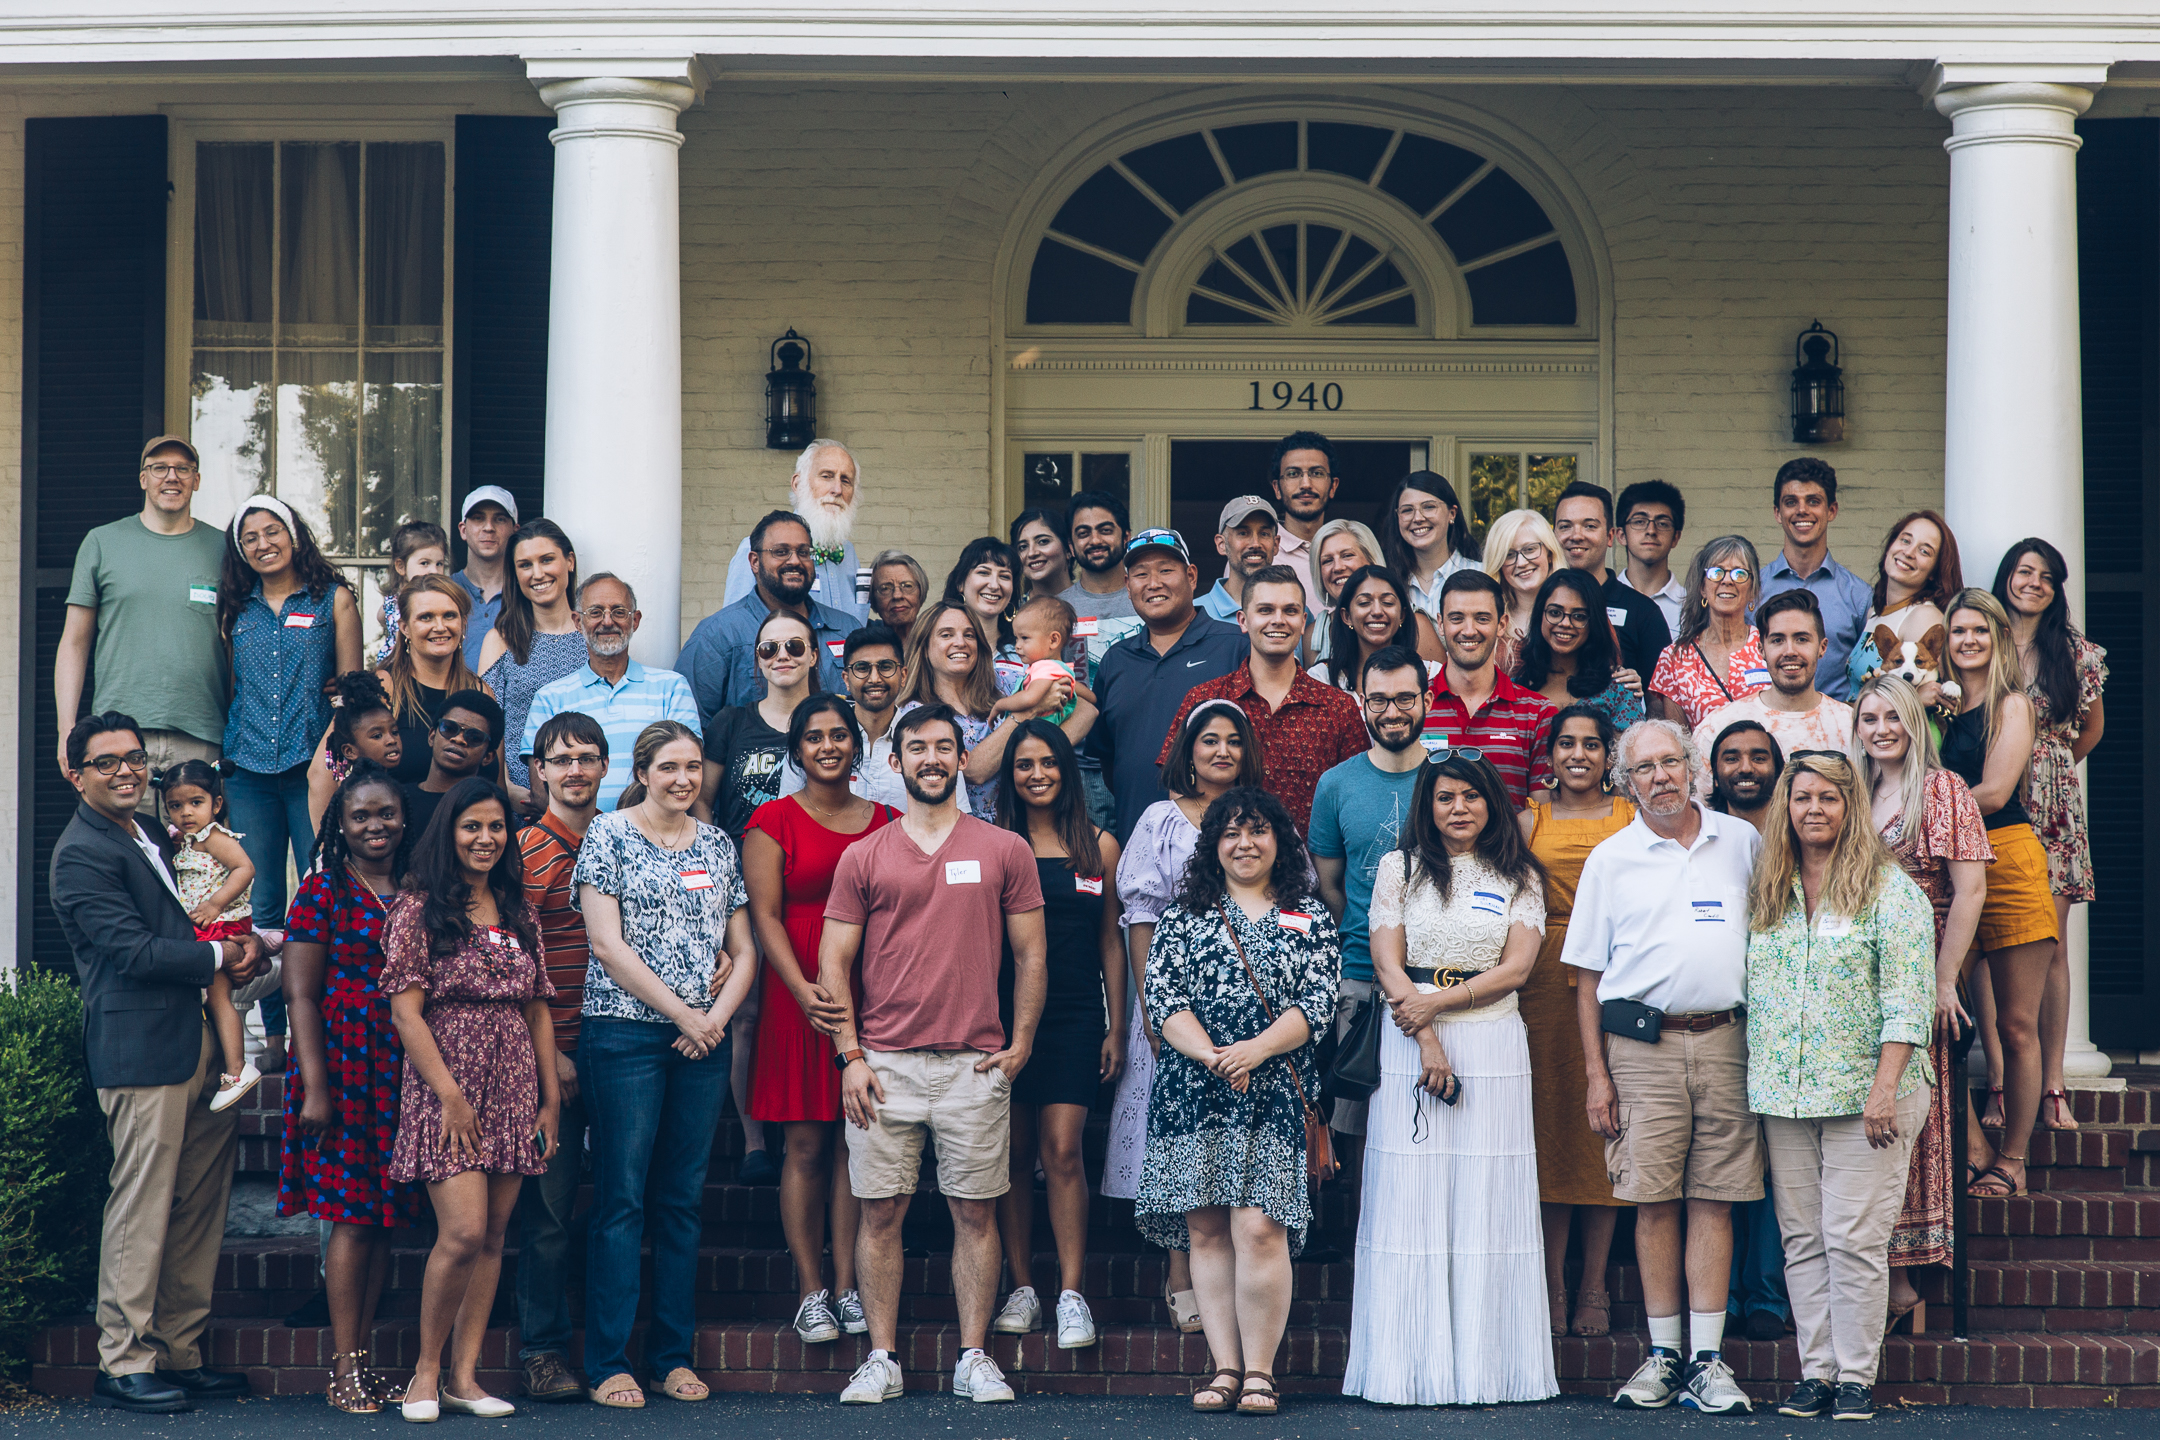 Department of Psychiatry faculty, residents and families (including dogs!) pose on the step of the Nunnlea House at the annual department picnic.